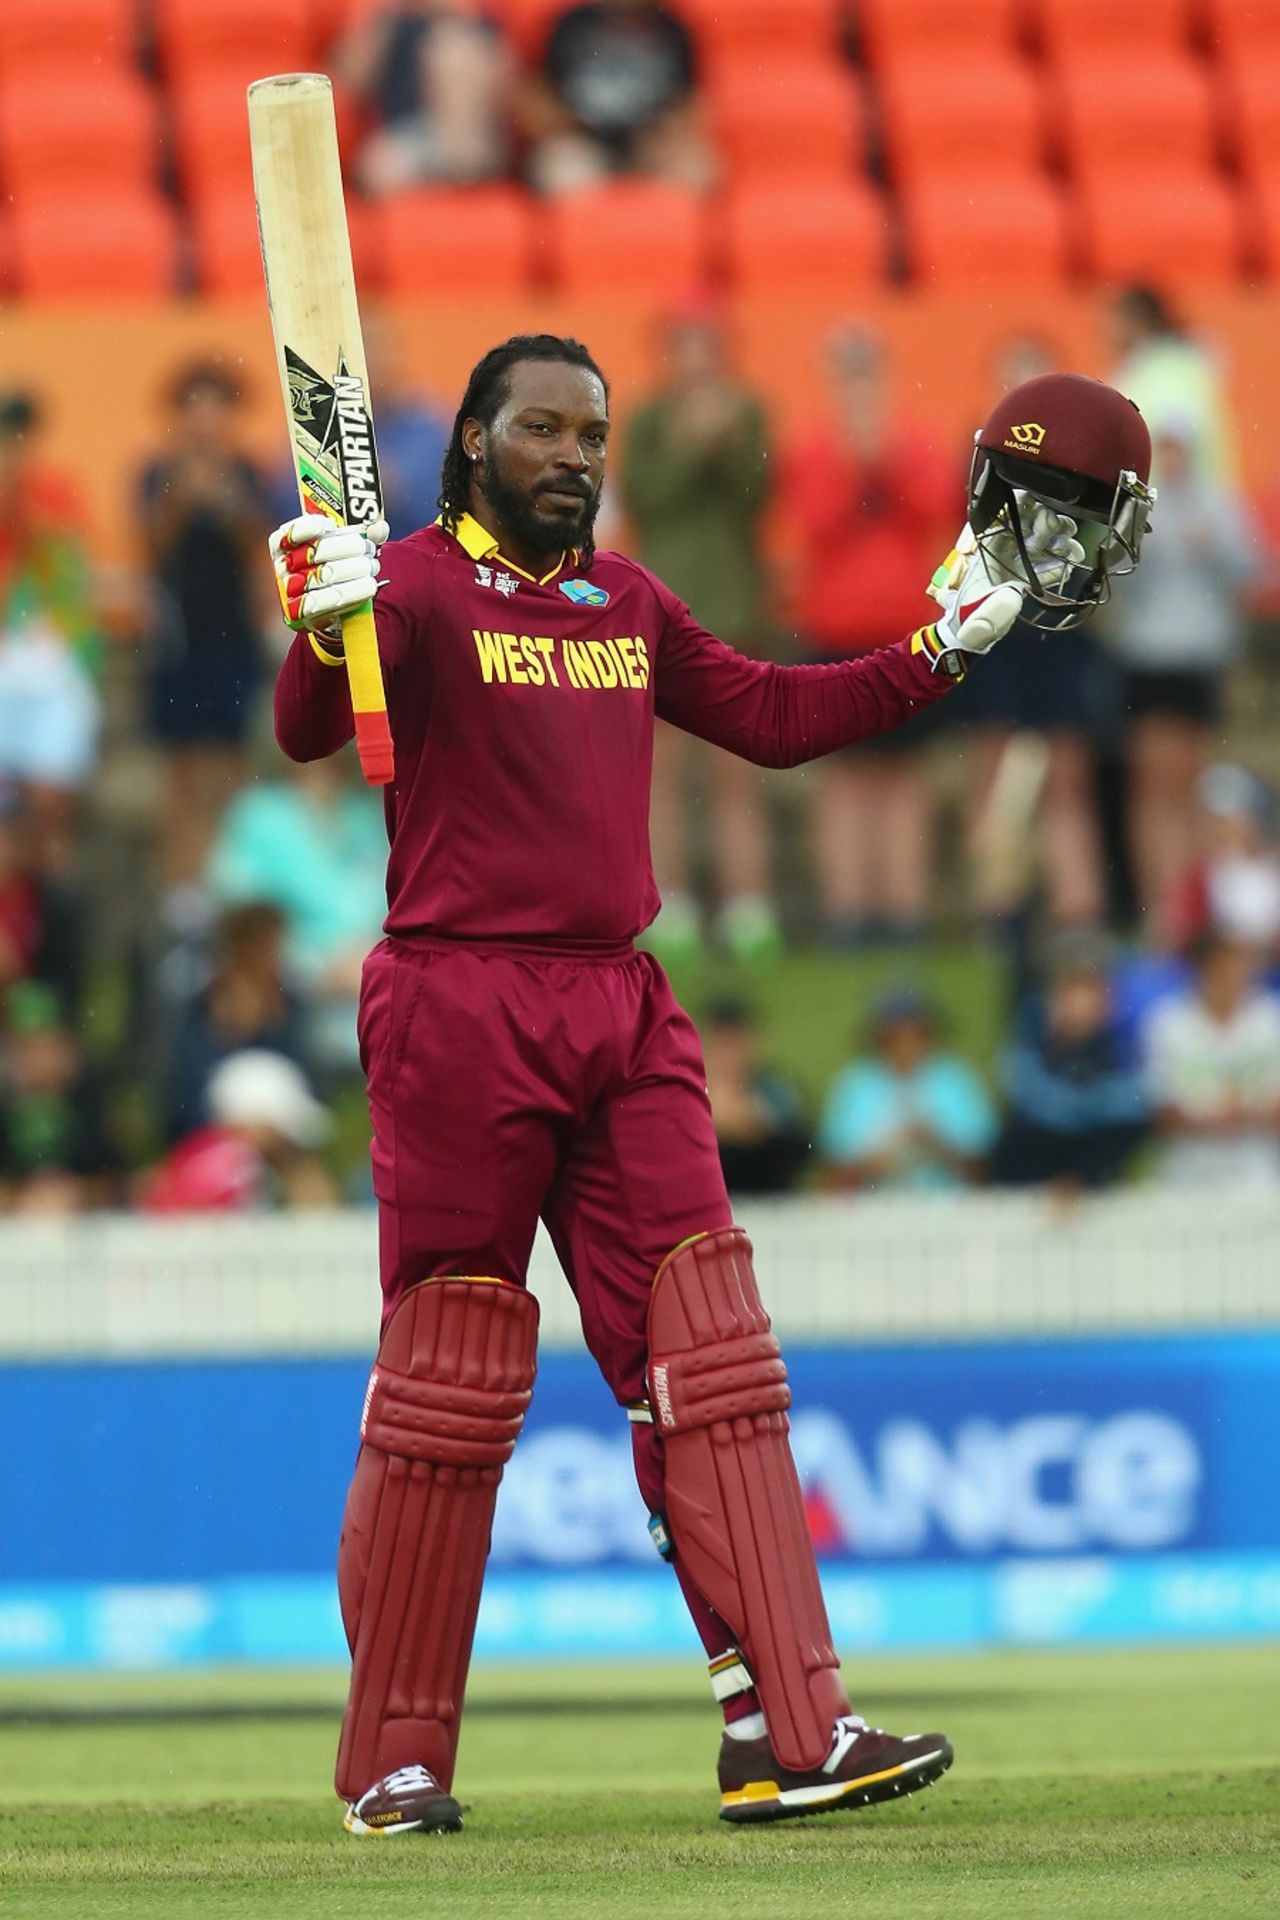 Chris Gayle raises his bat after bringing up his hundred, West Indies v Zimbabwe, World Cup 2015, Group B, Canberra, February 24, 2015